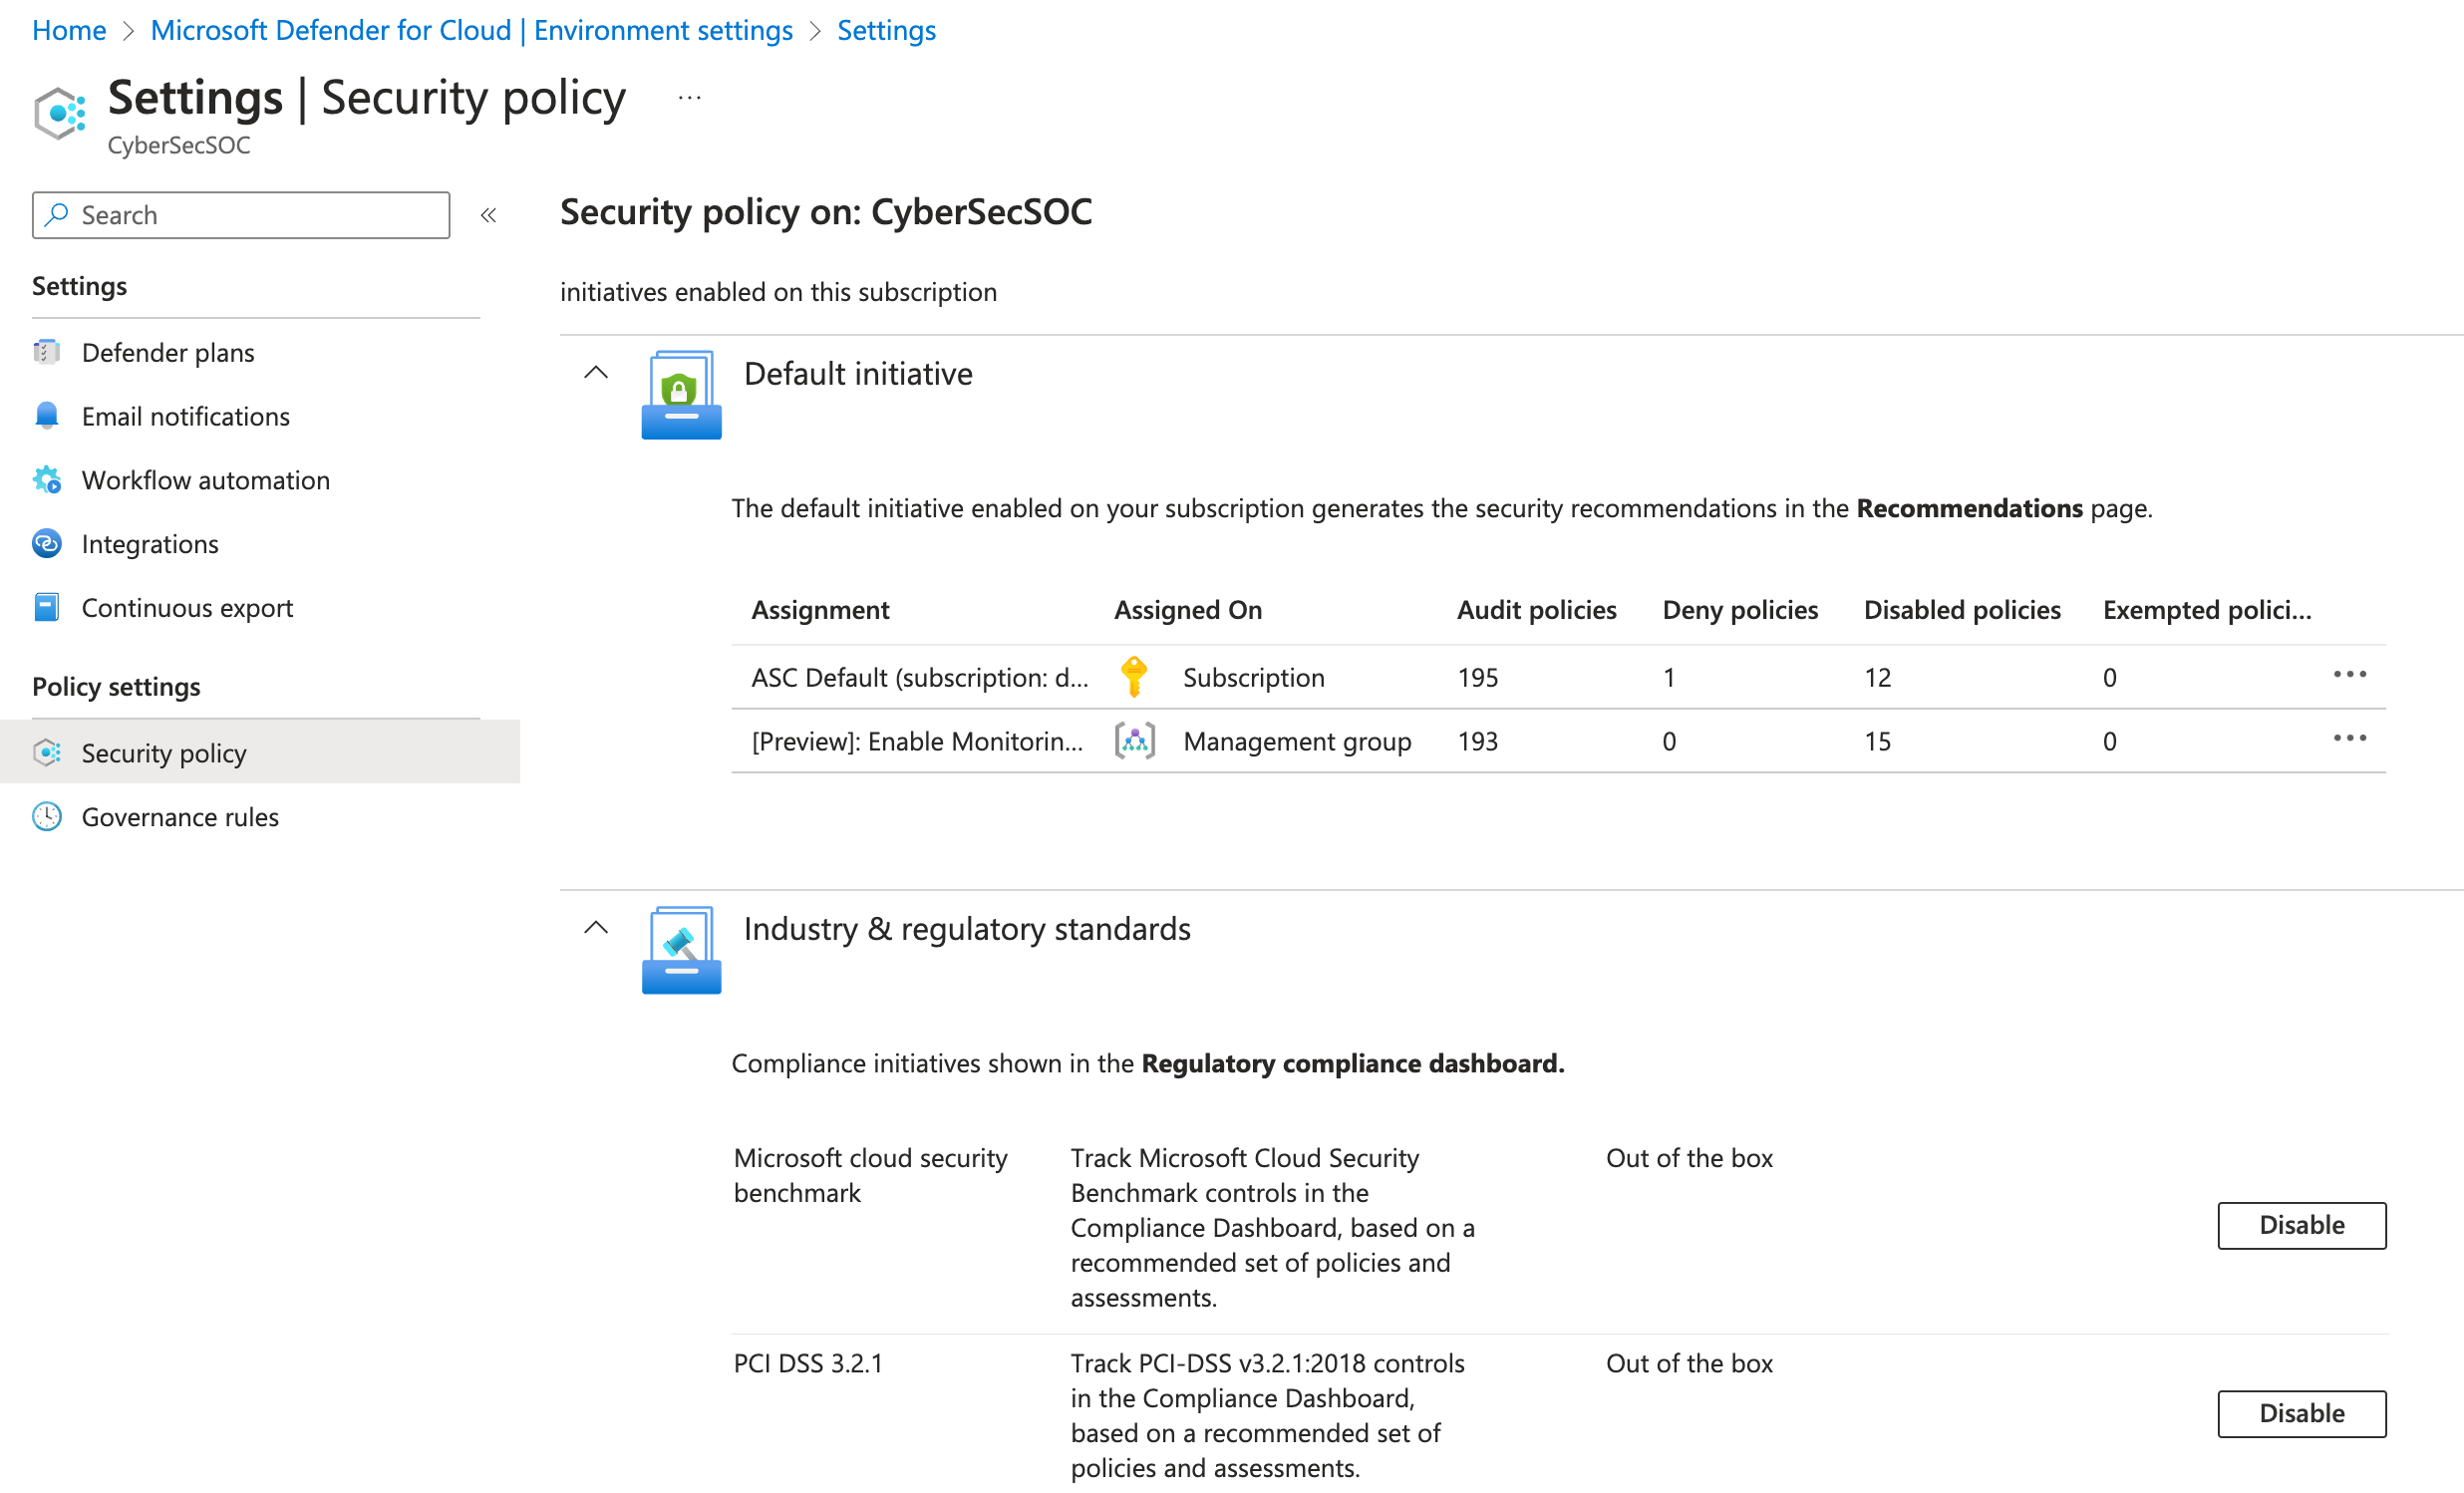 Screenshot showing a subscription's security policy settings page.